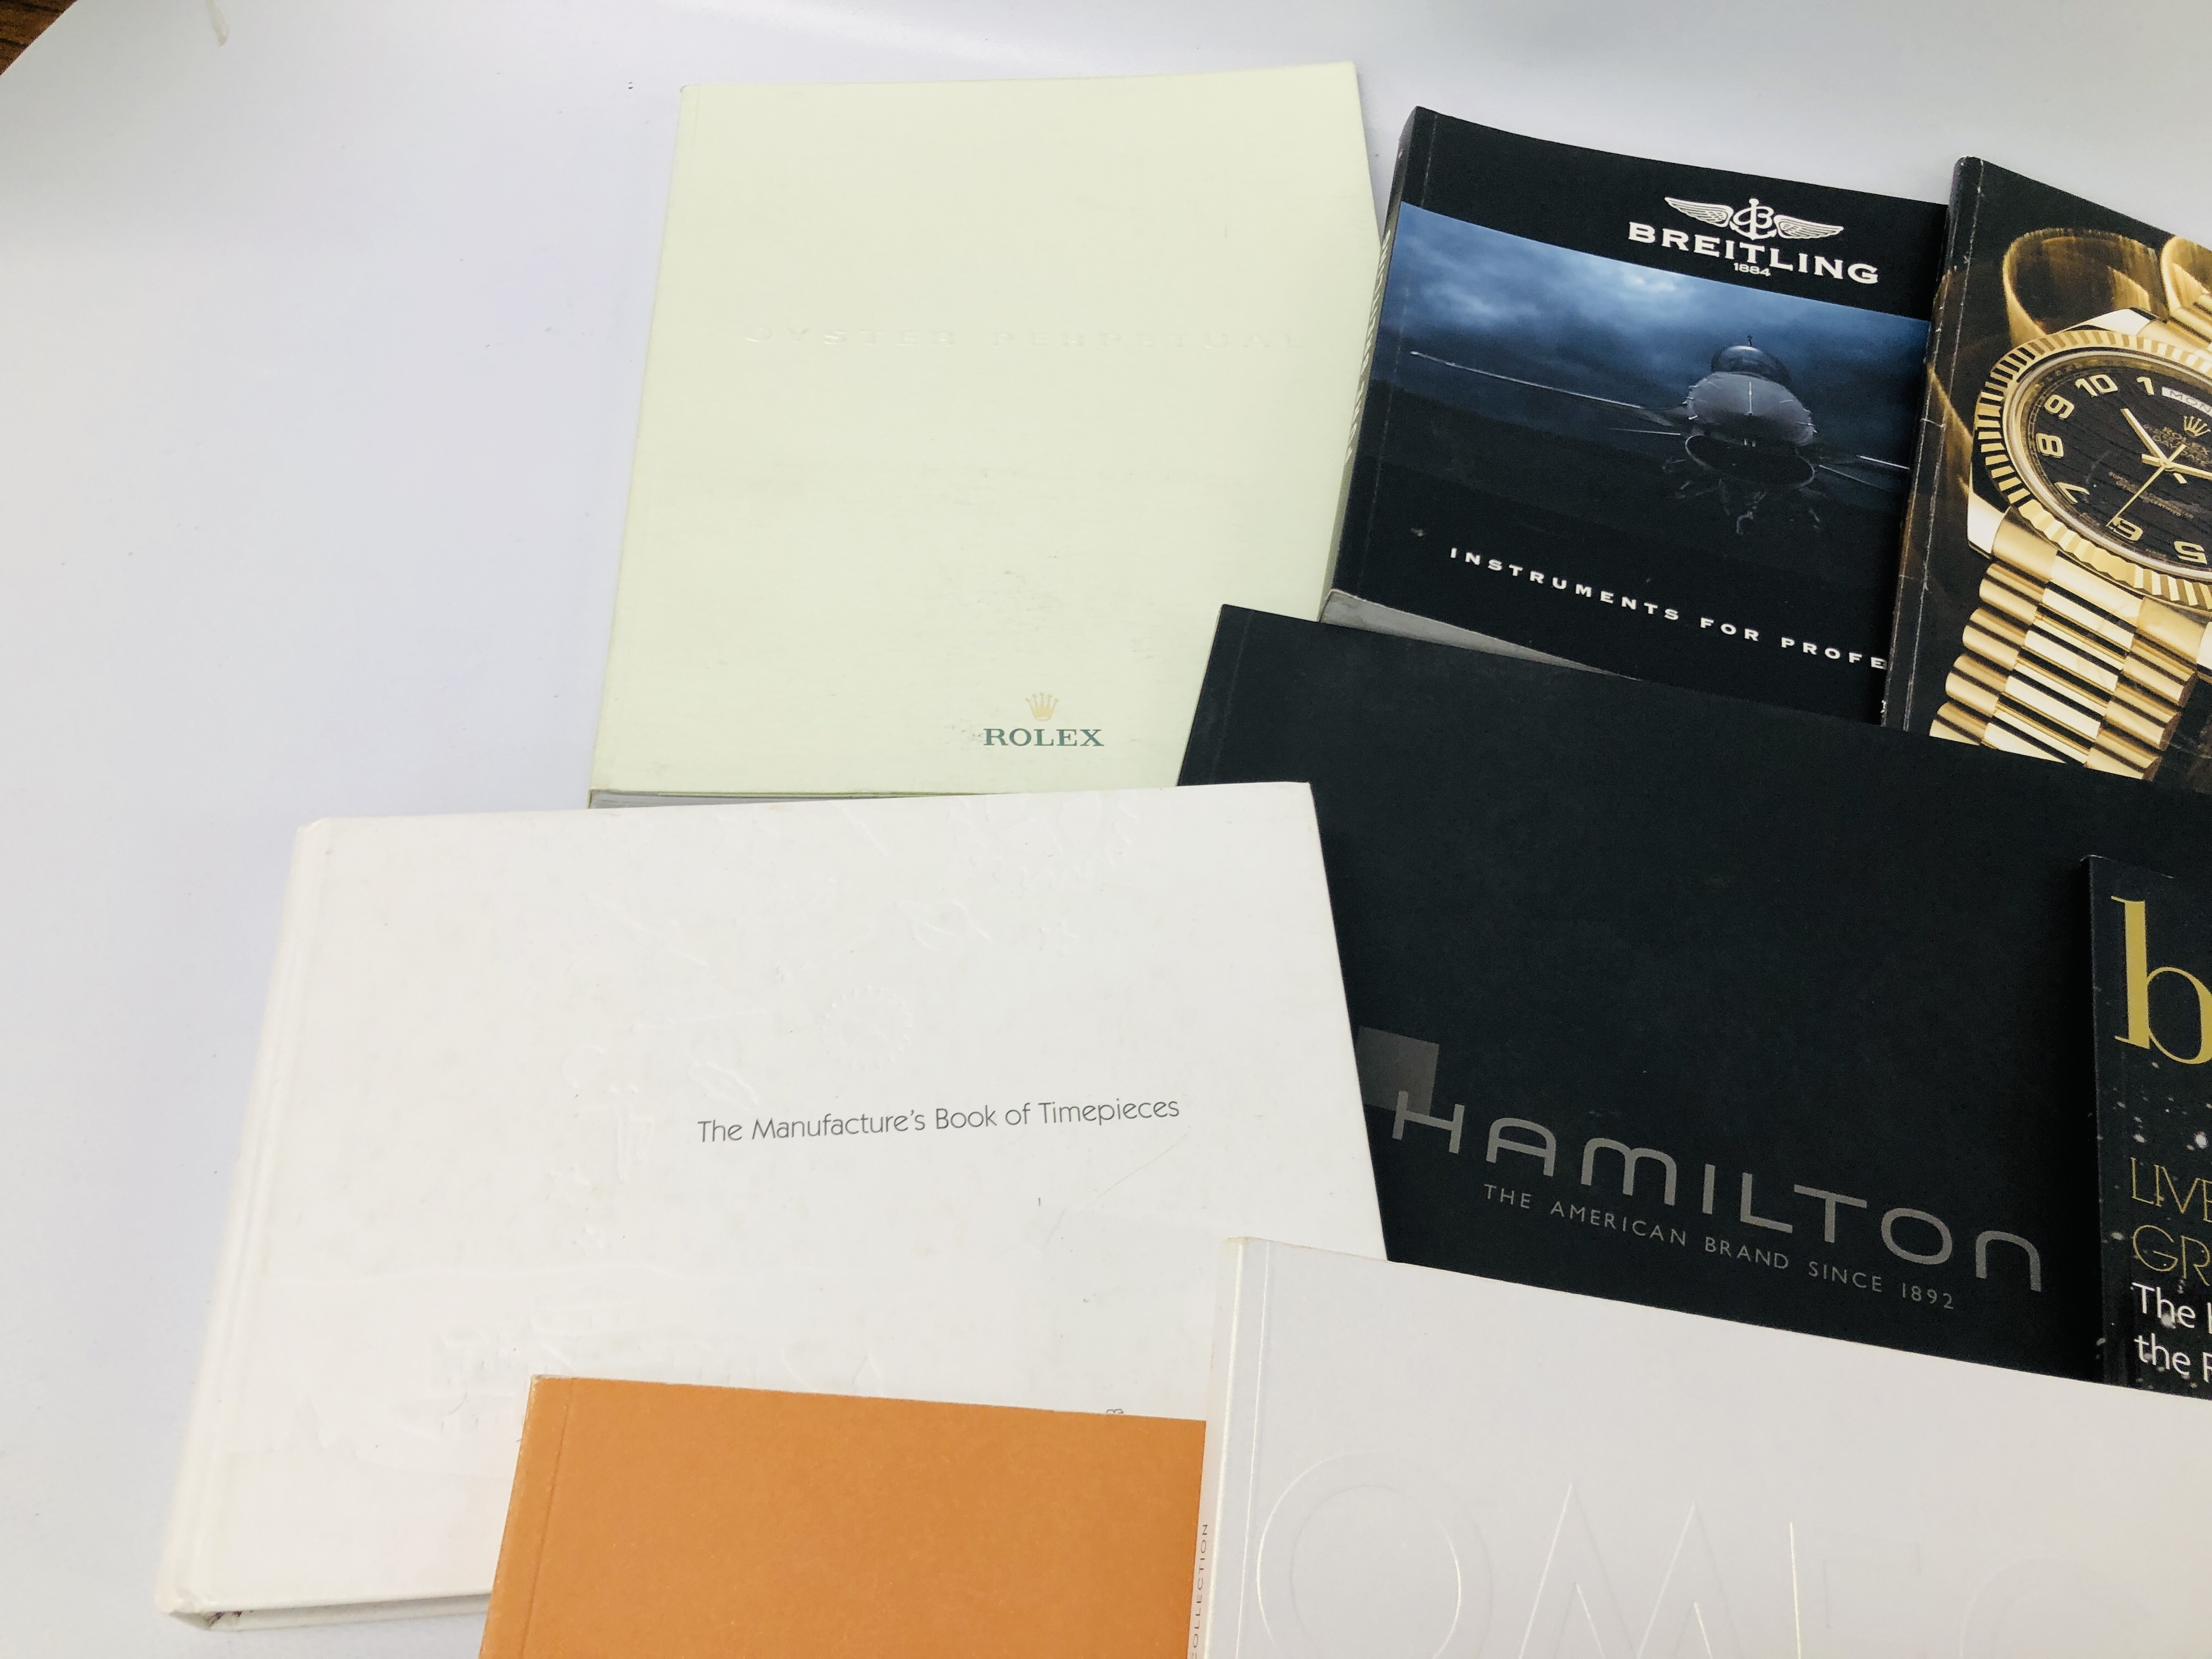 COLLECTION OF WATCH BROCHURES TO INCLUDE JAEGER - LE COULTRE, OMEGA, BREITLING, ROLEX ETC. - Image 3 of 5